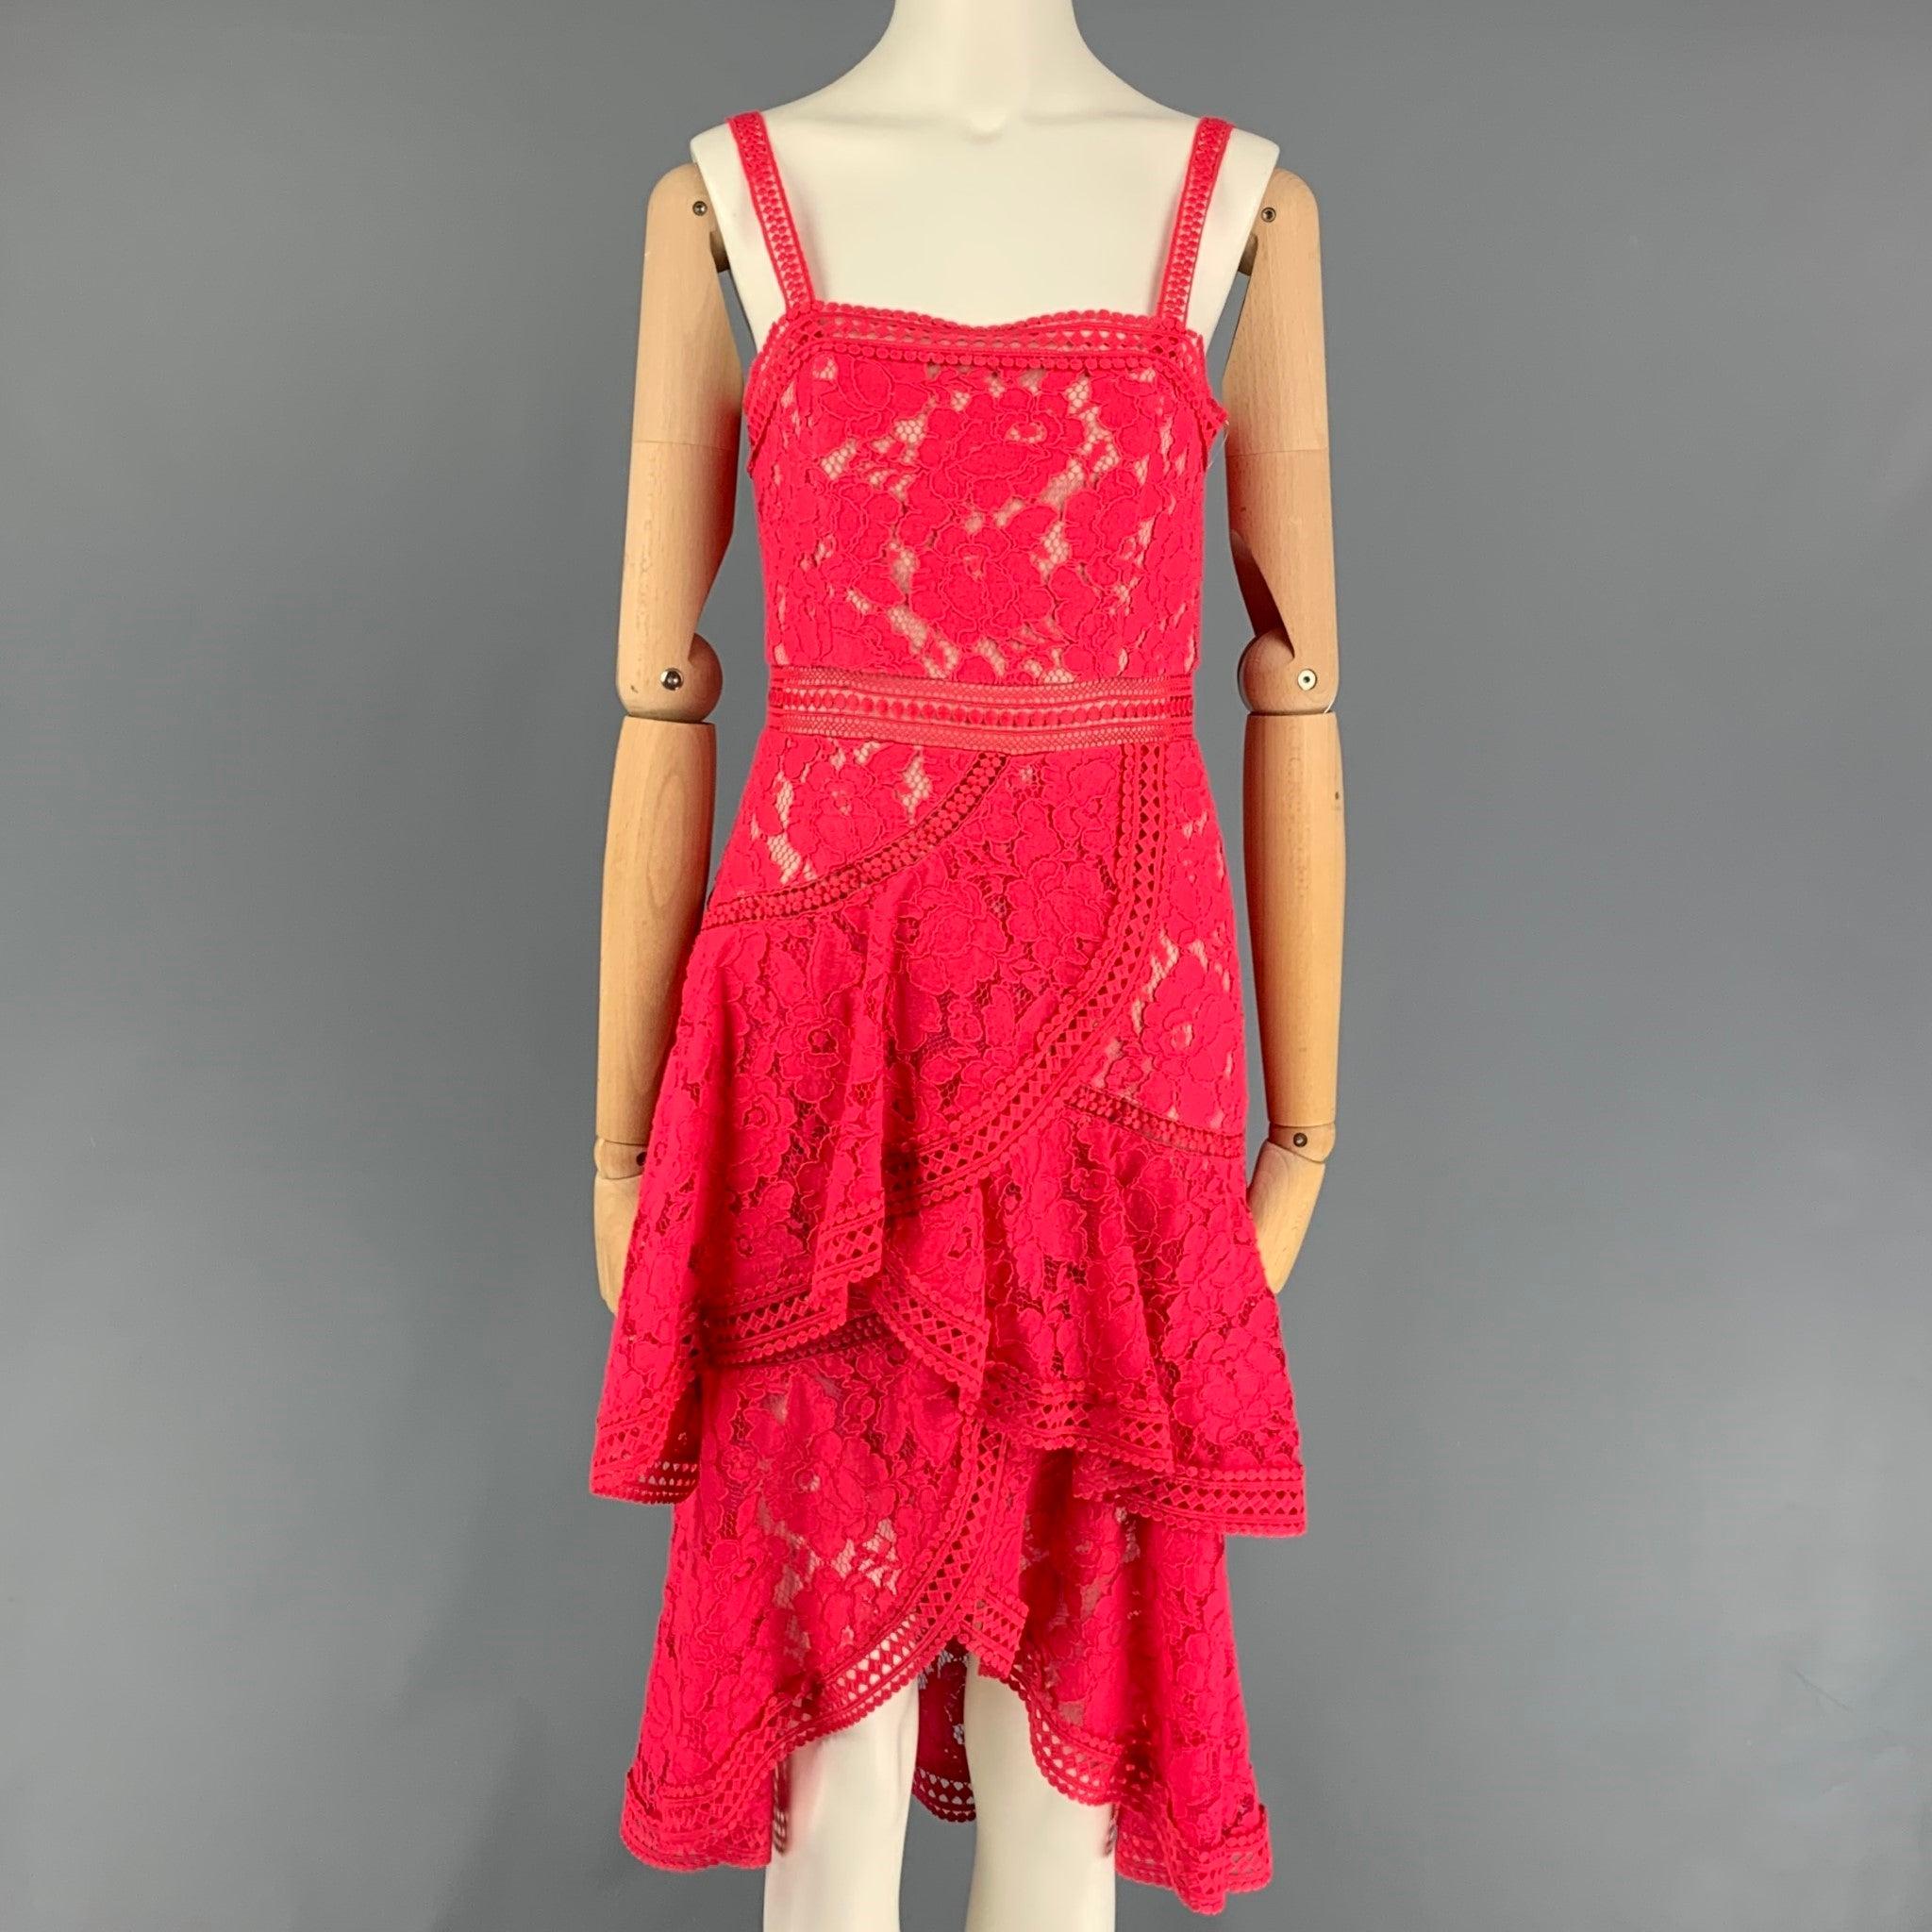 ALICE + OLIVIA dress comes in a raspberry eyelet cotton / nylon with a slip line featuring an a-line style and a back zip up closure.
Very Good
Pre-Owned Condition. Fabric tag removed.  

Marked:   0 

Measurements: 
  Bust: 28 inches  Waist: 26